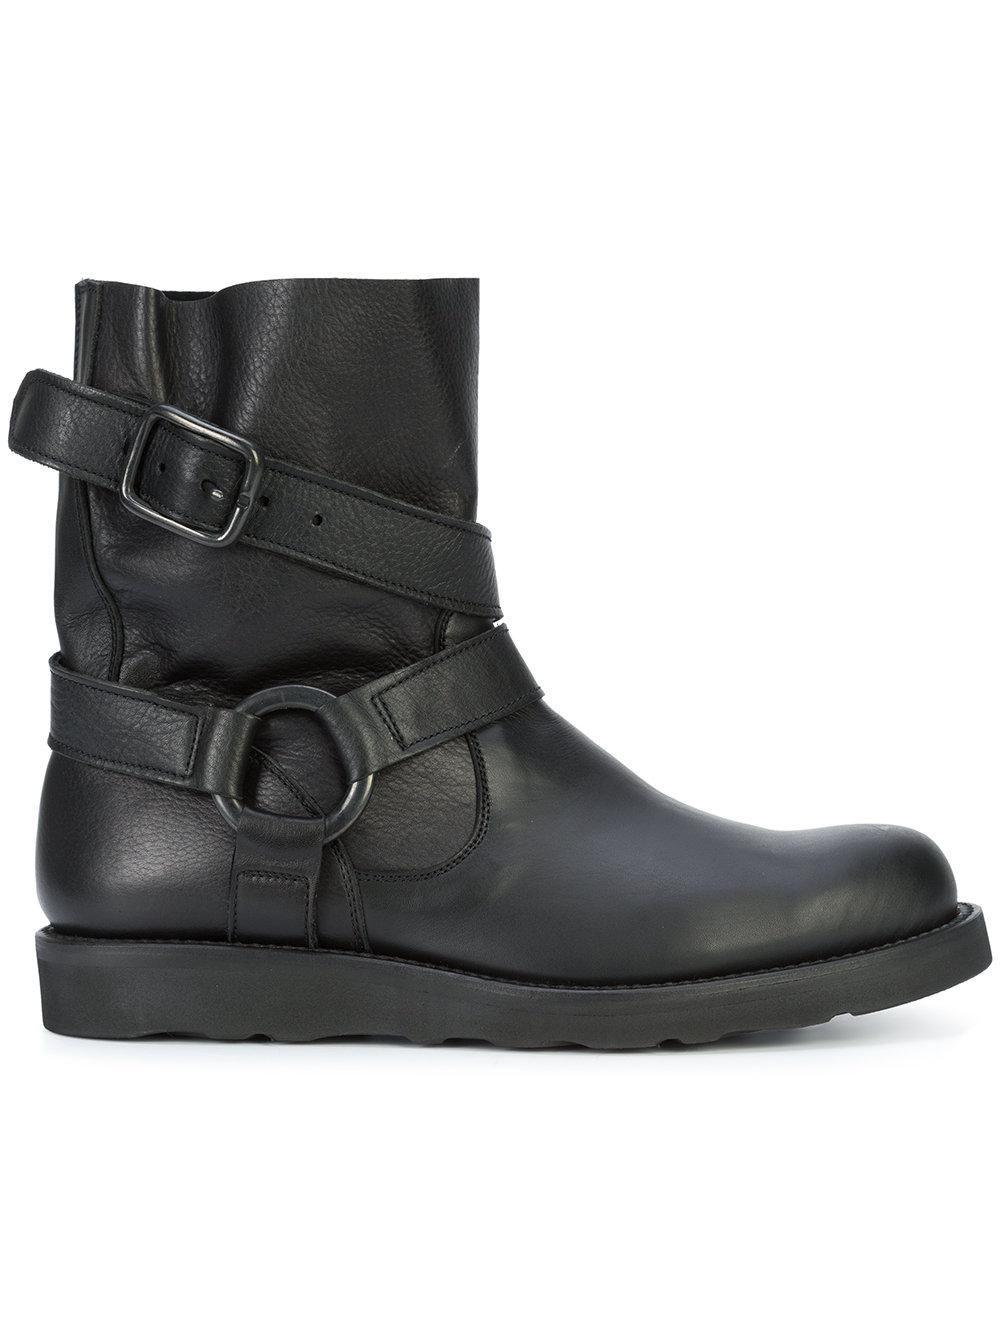 Yohji Yamamoto Calf Leather Ring Boots in Black for Men - Lyst